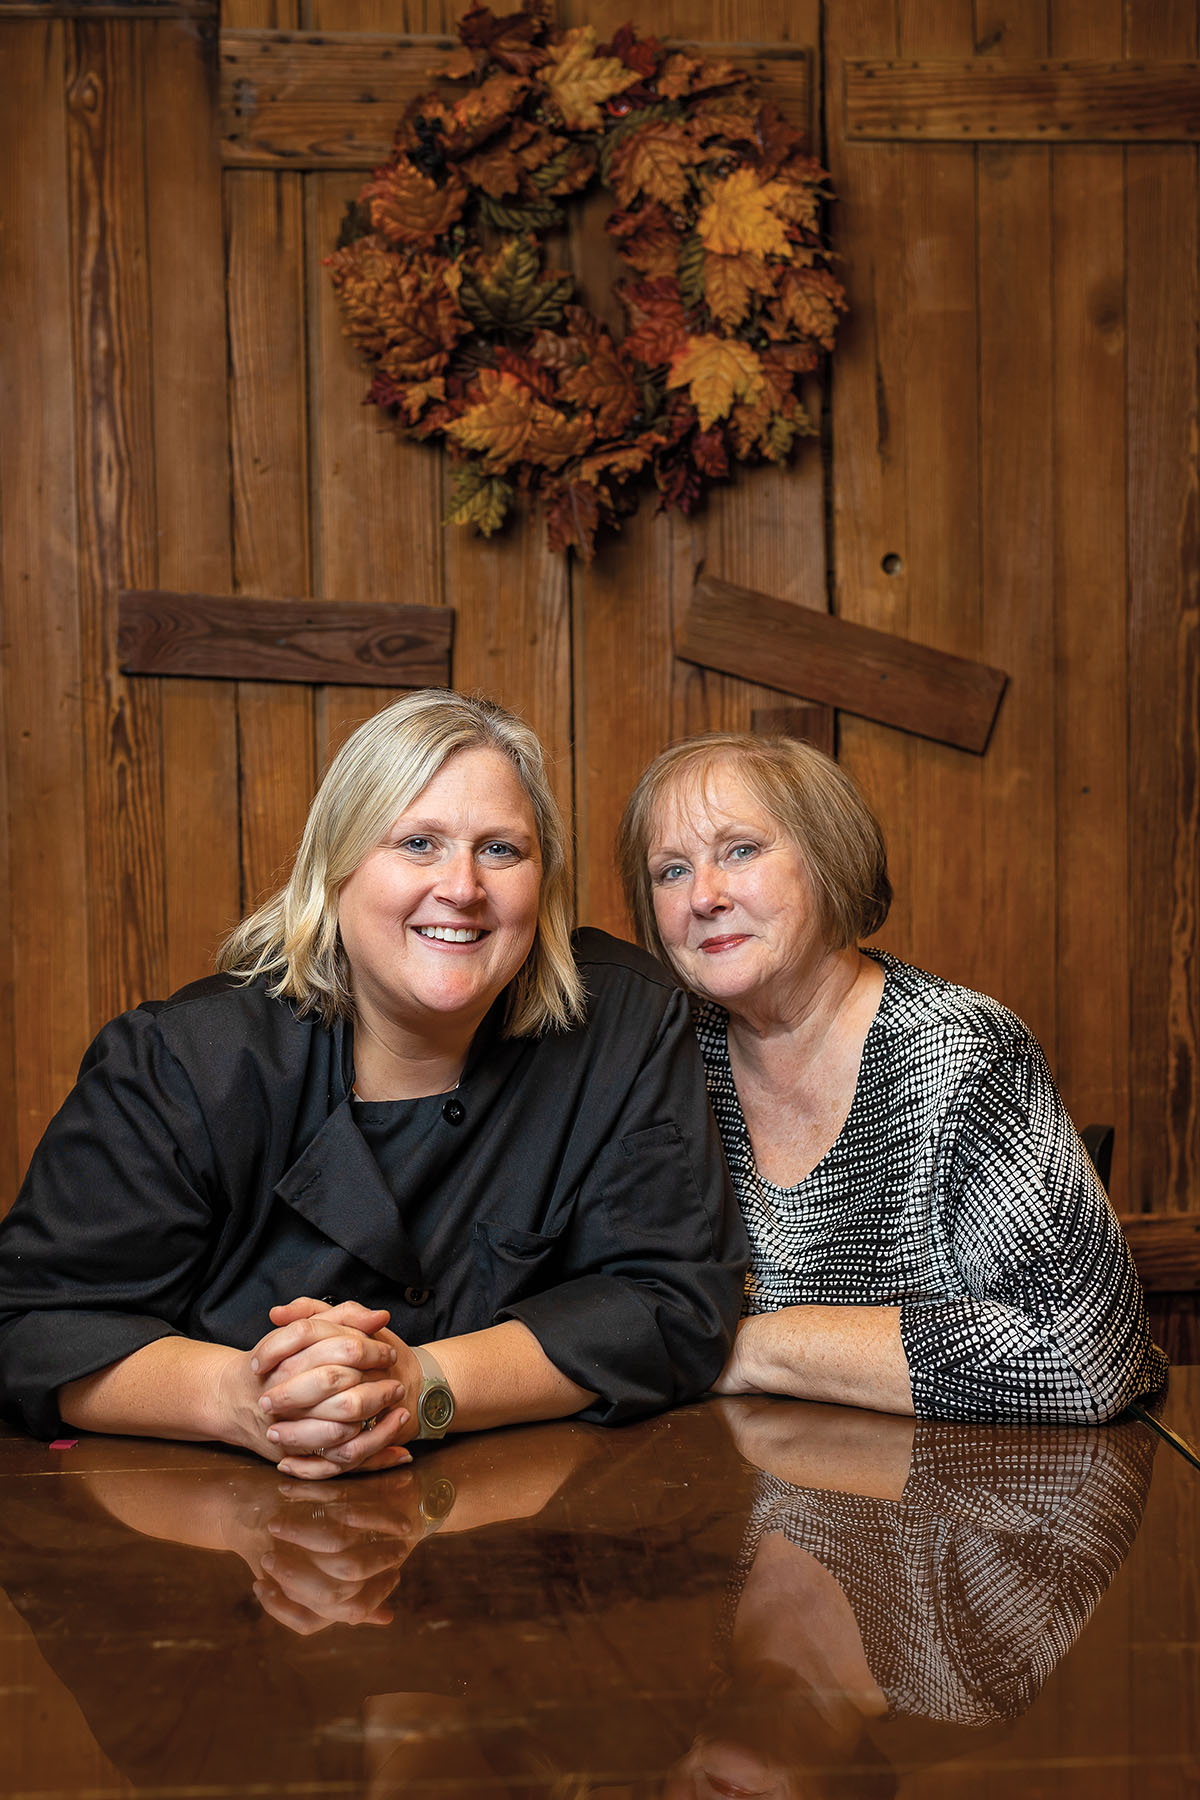 Two women sit in a wooden room at a glossy wood table